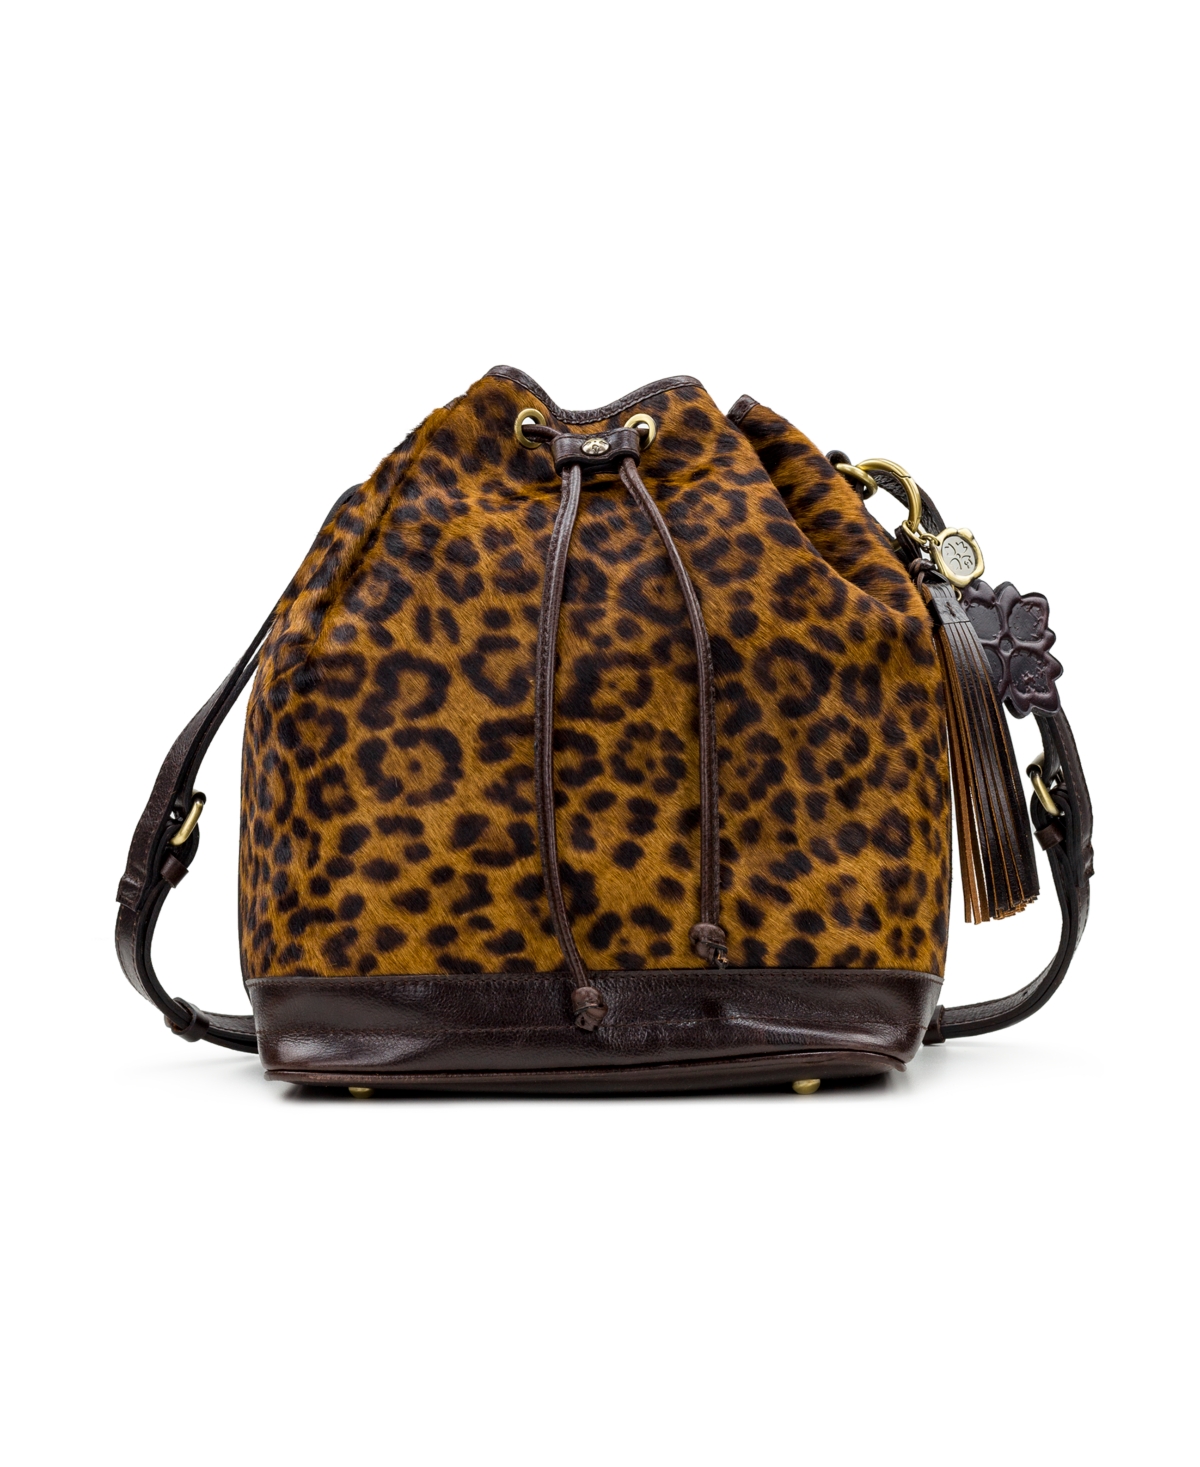 Patricia Nash Women's Melrose Drawstring Large Bag And Key Fob In Leopard/chocolate